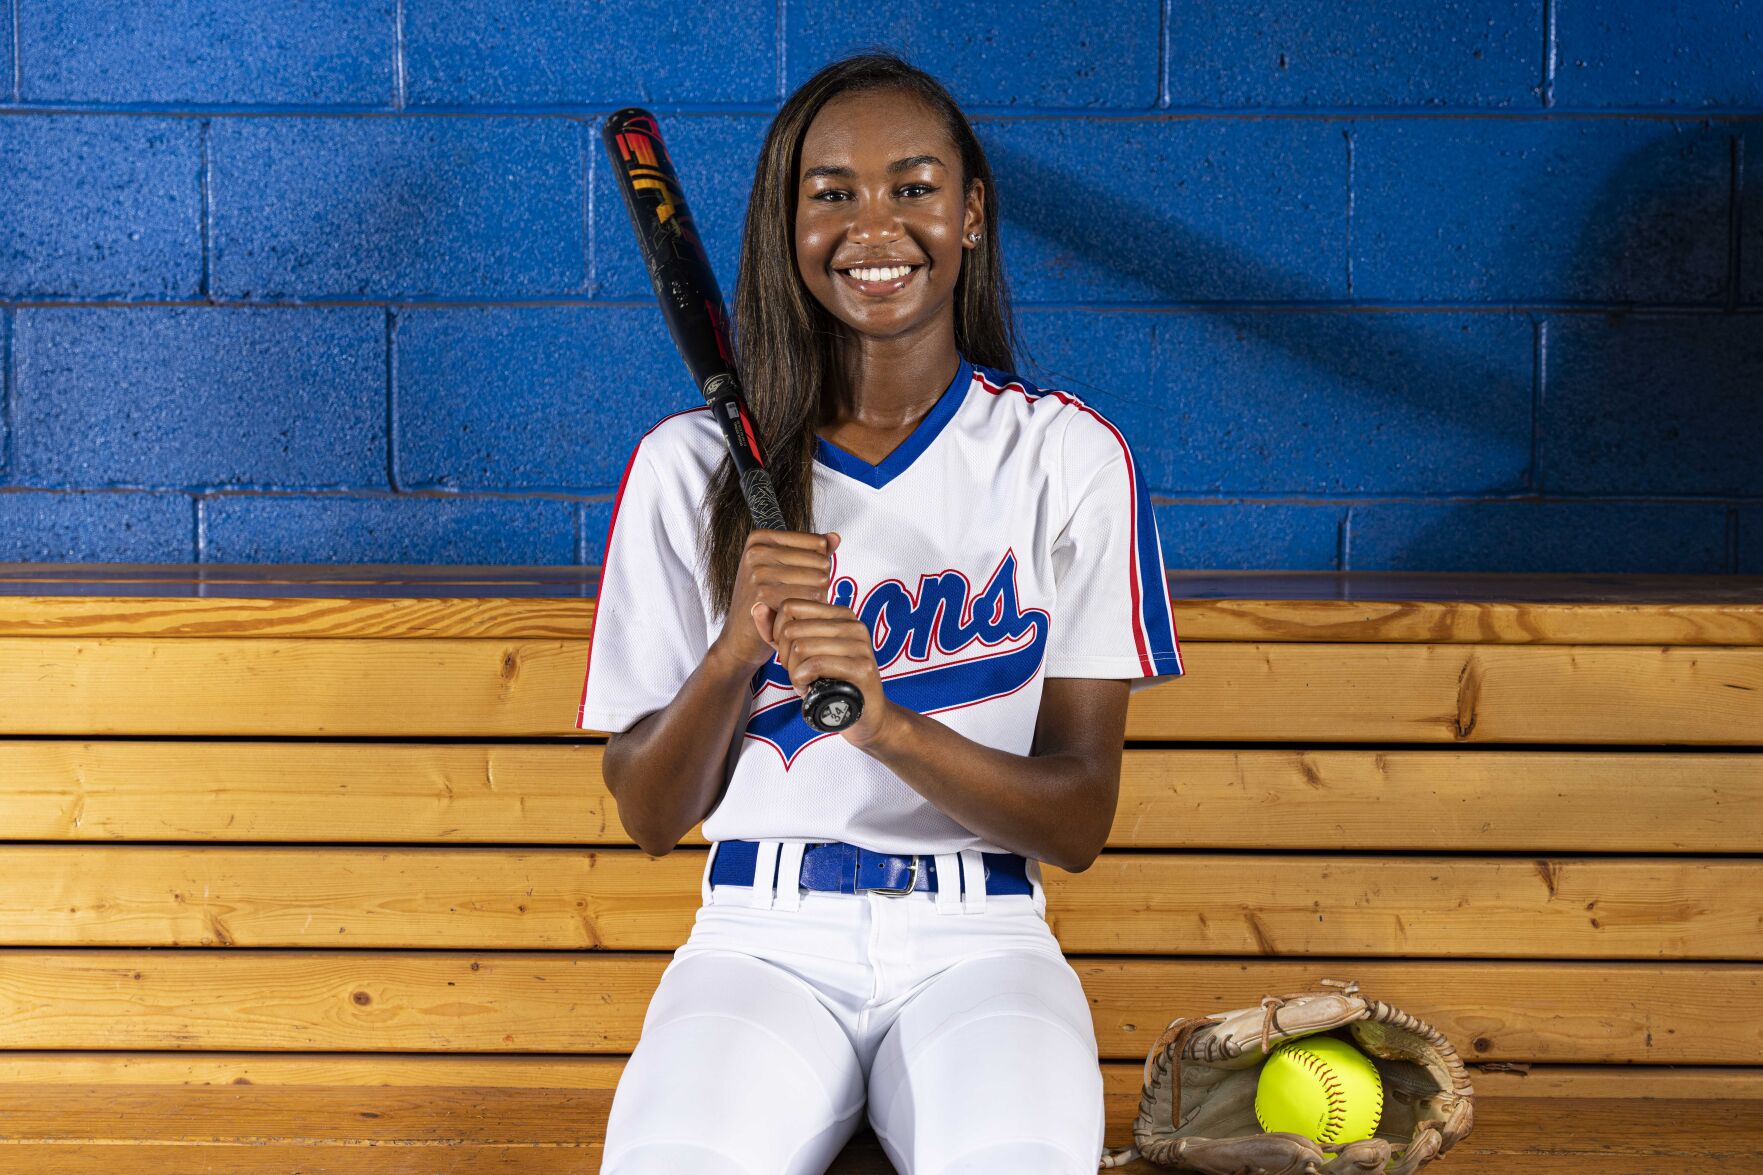 Peachtree Ridge two-sport star Kennedy Harp is one of states most dynamic softball players Sports gwinnettdailypost